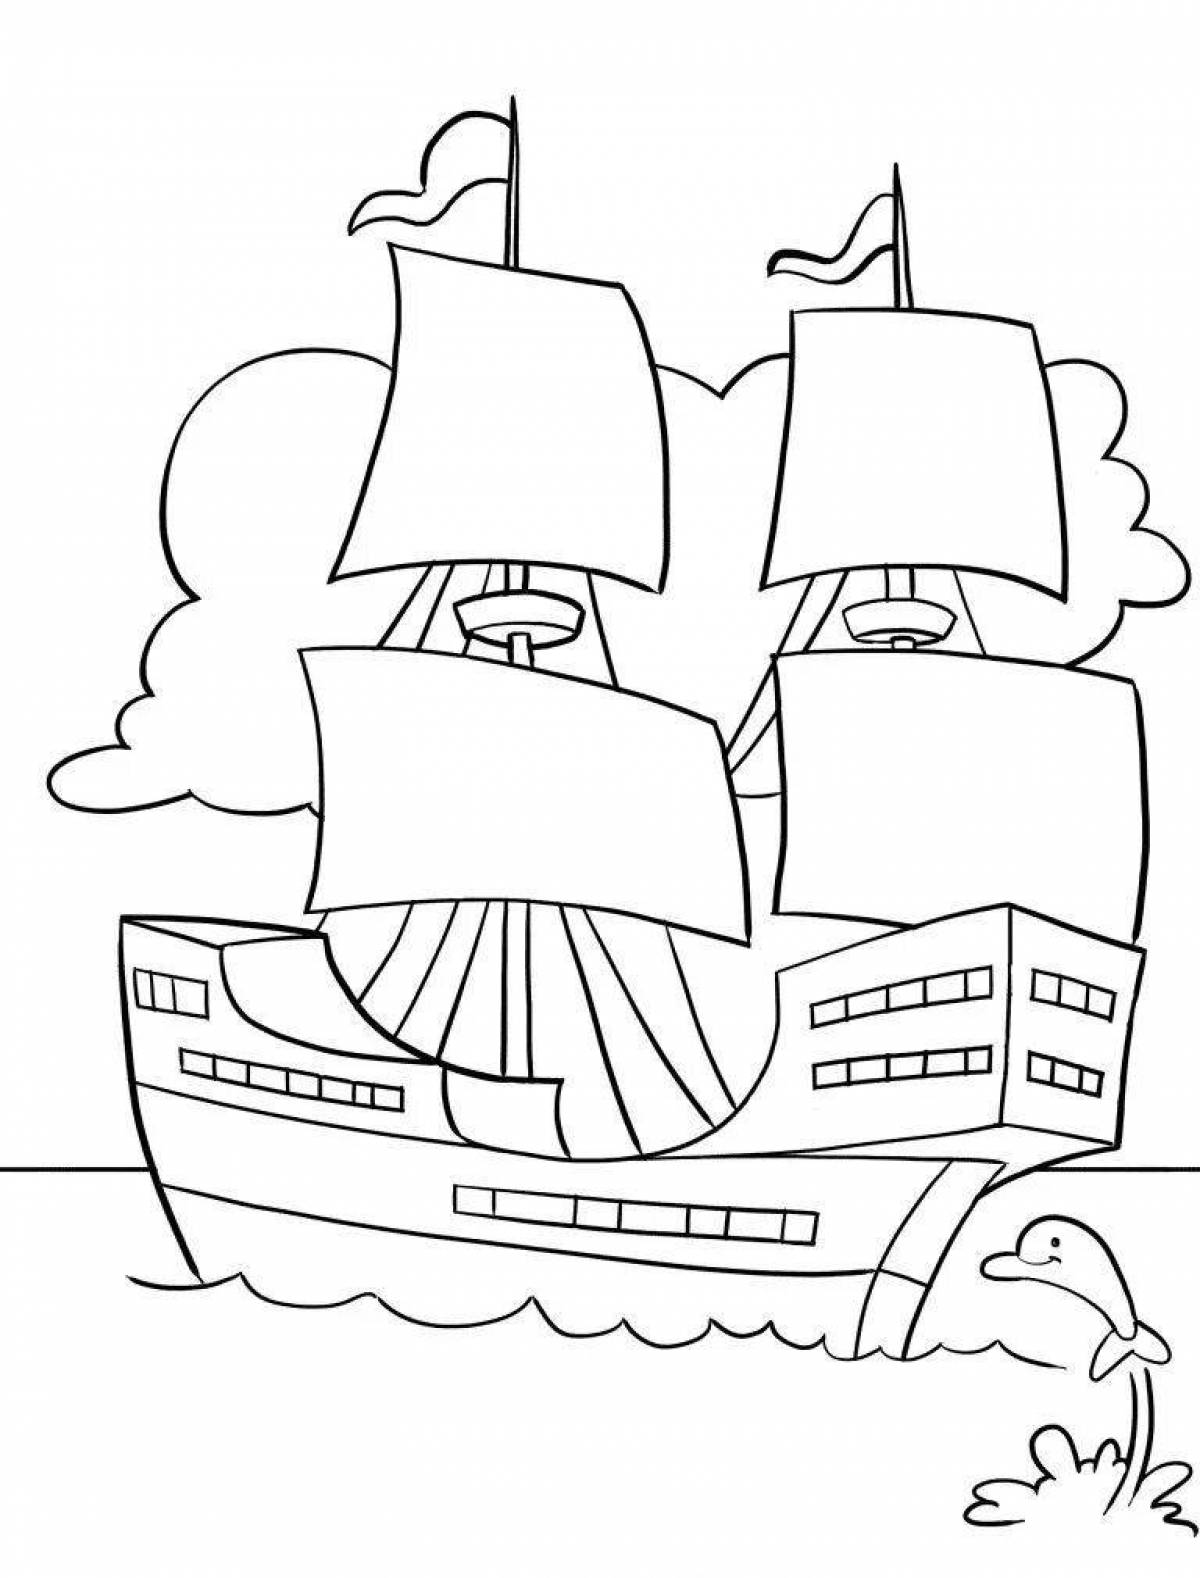 Rough sailboat coloring page for kids